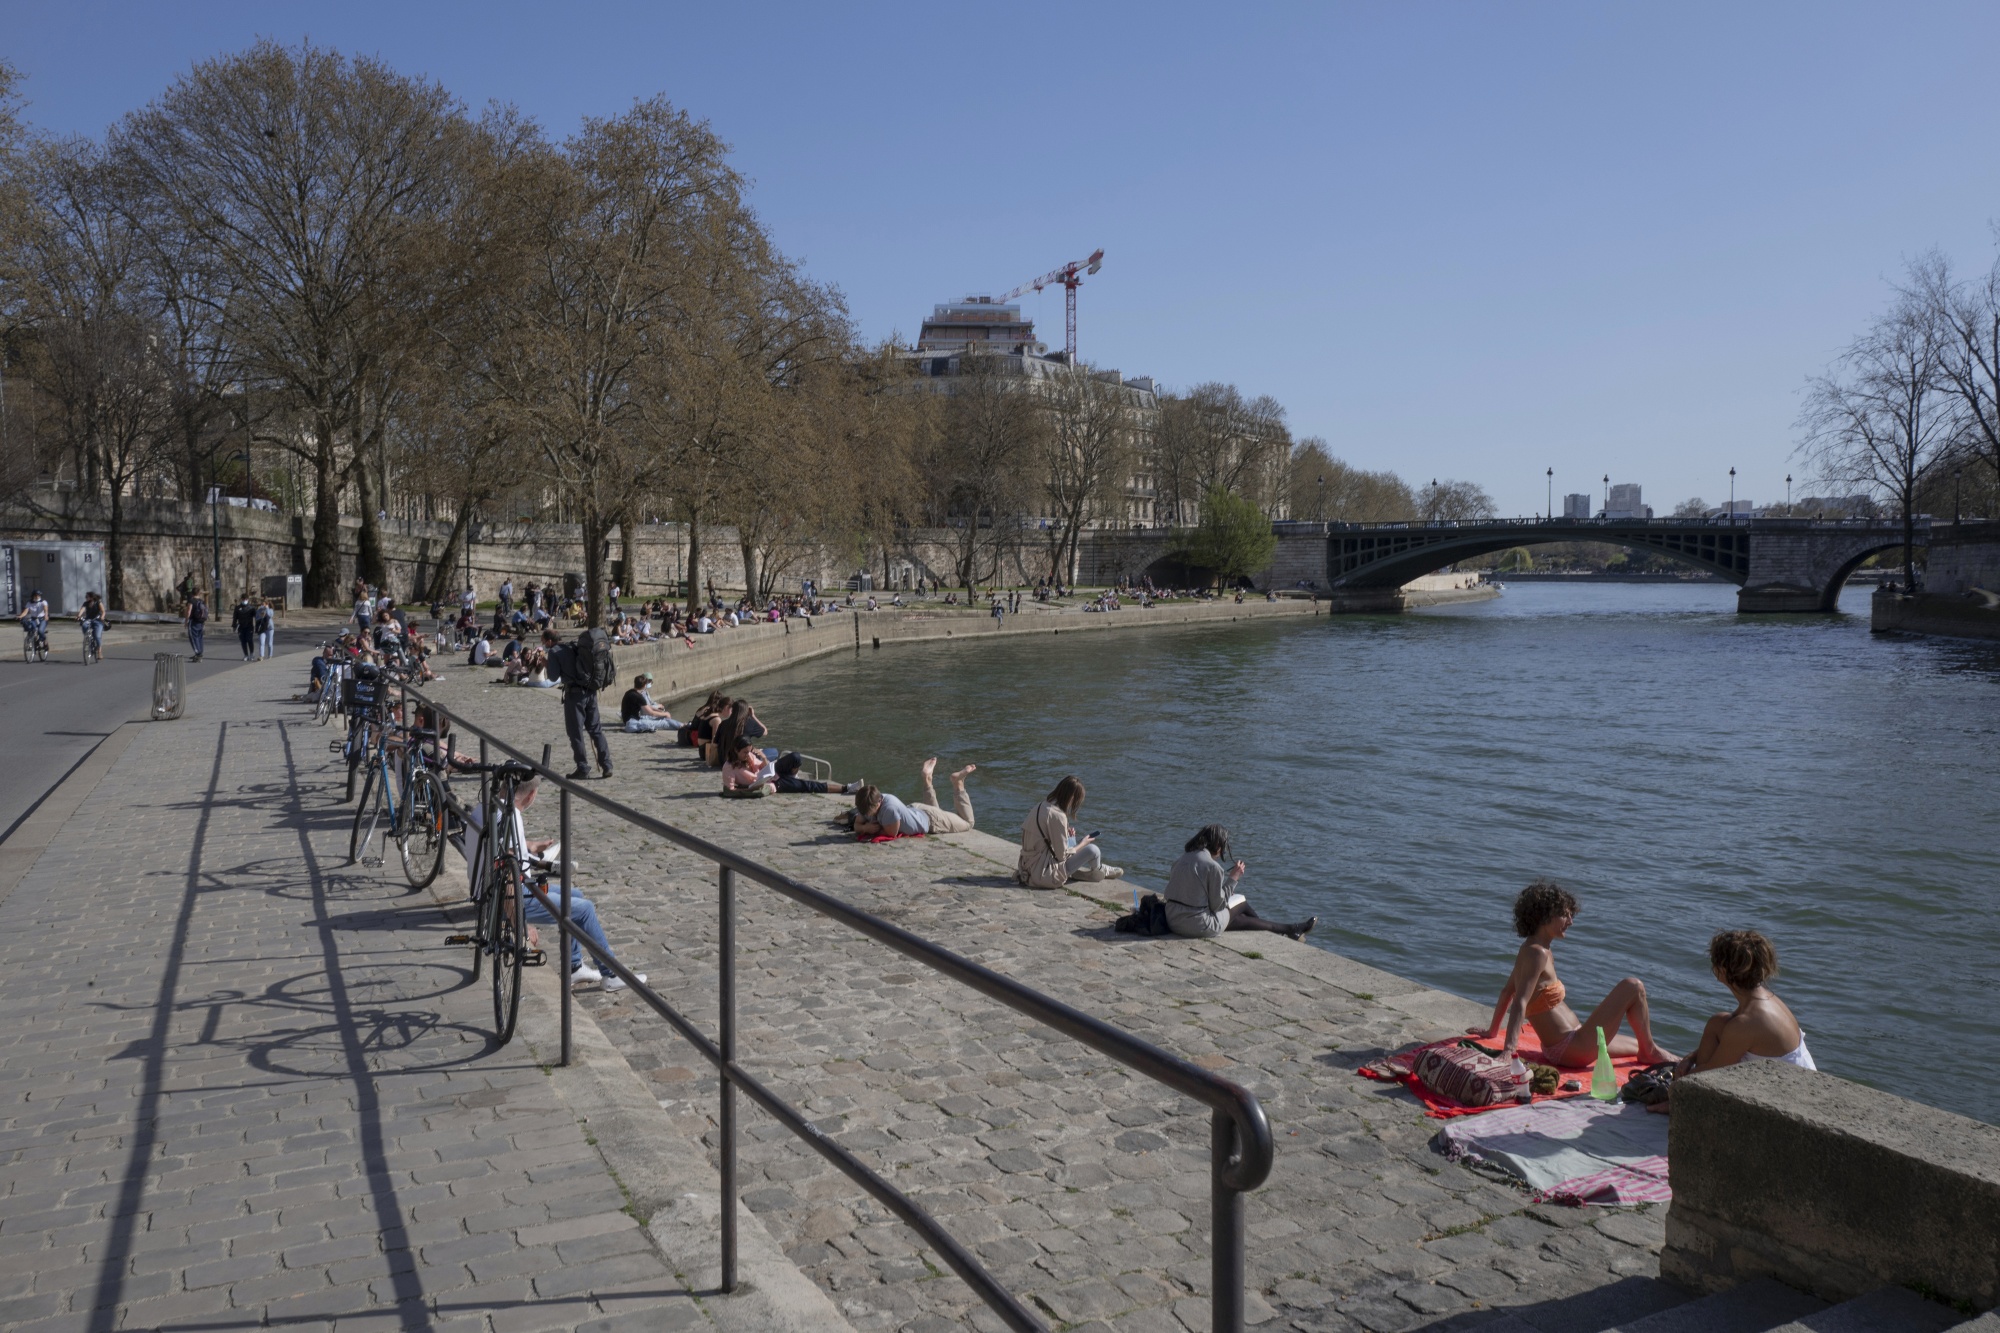 Summer Travel in Paris Seen as Dry Run for 2024 Olympic Games - Bloomberg